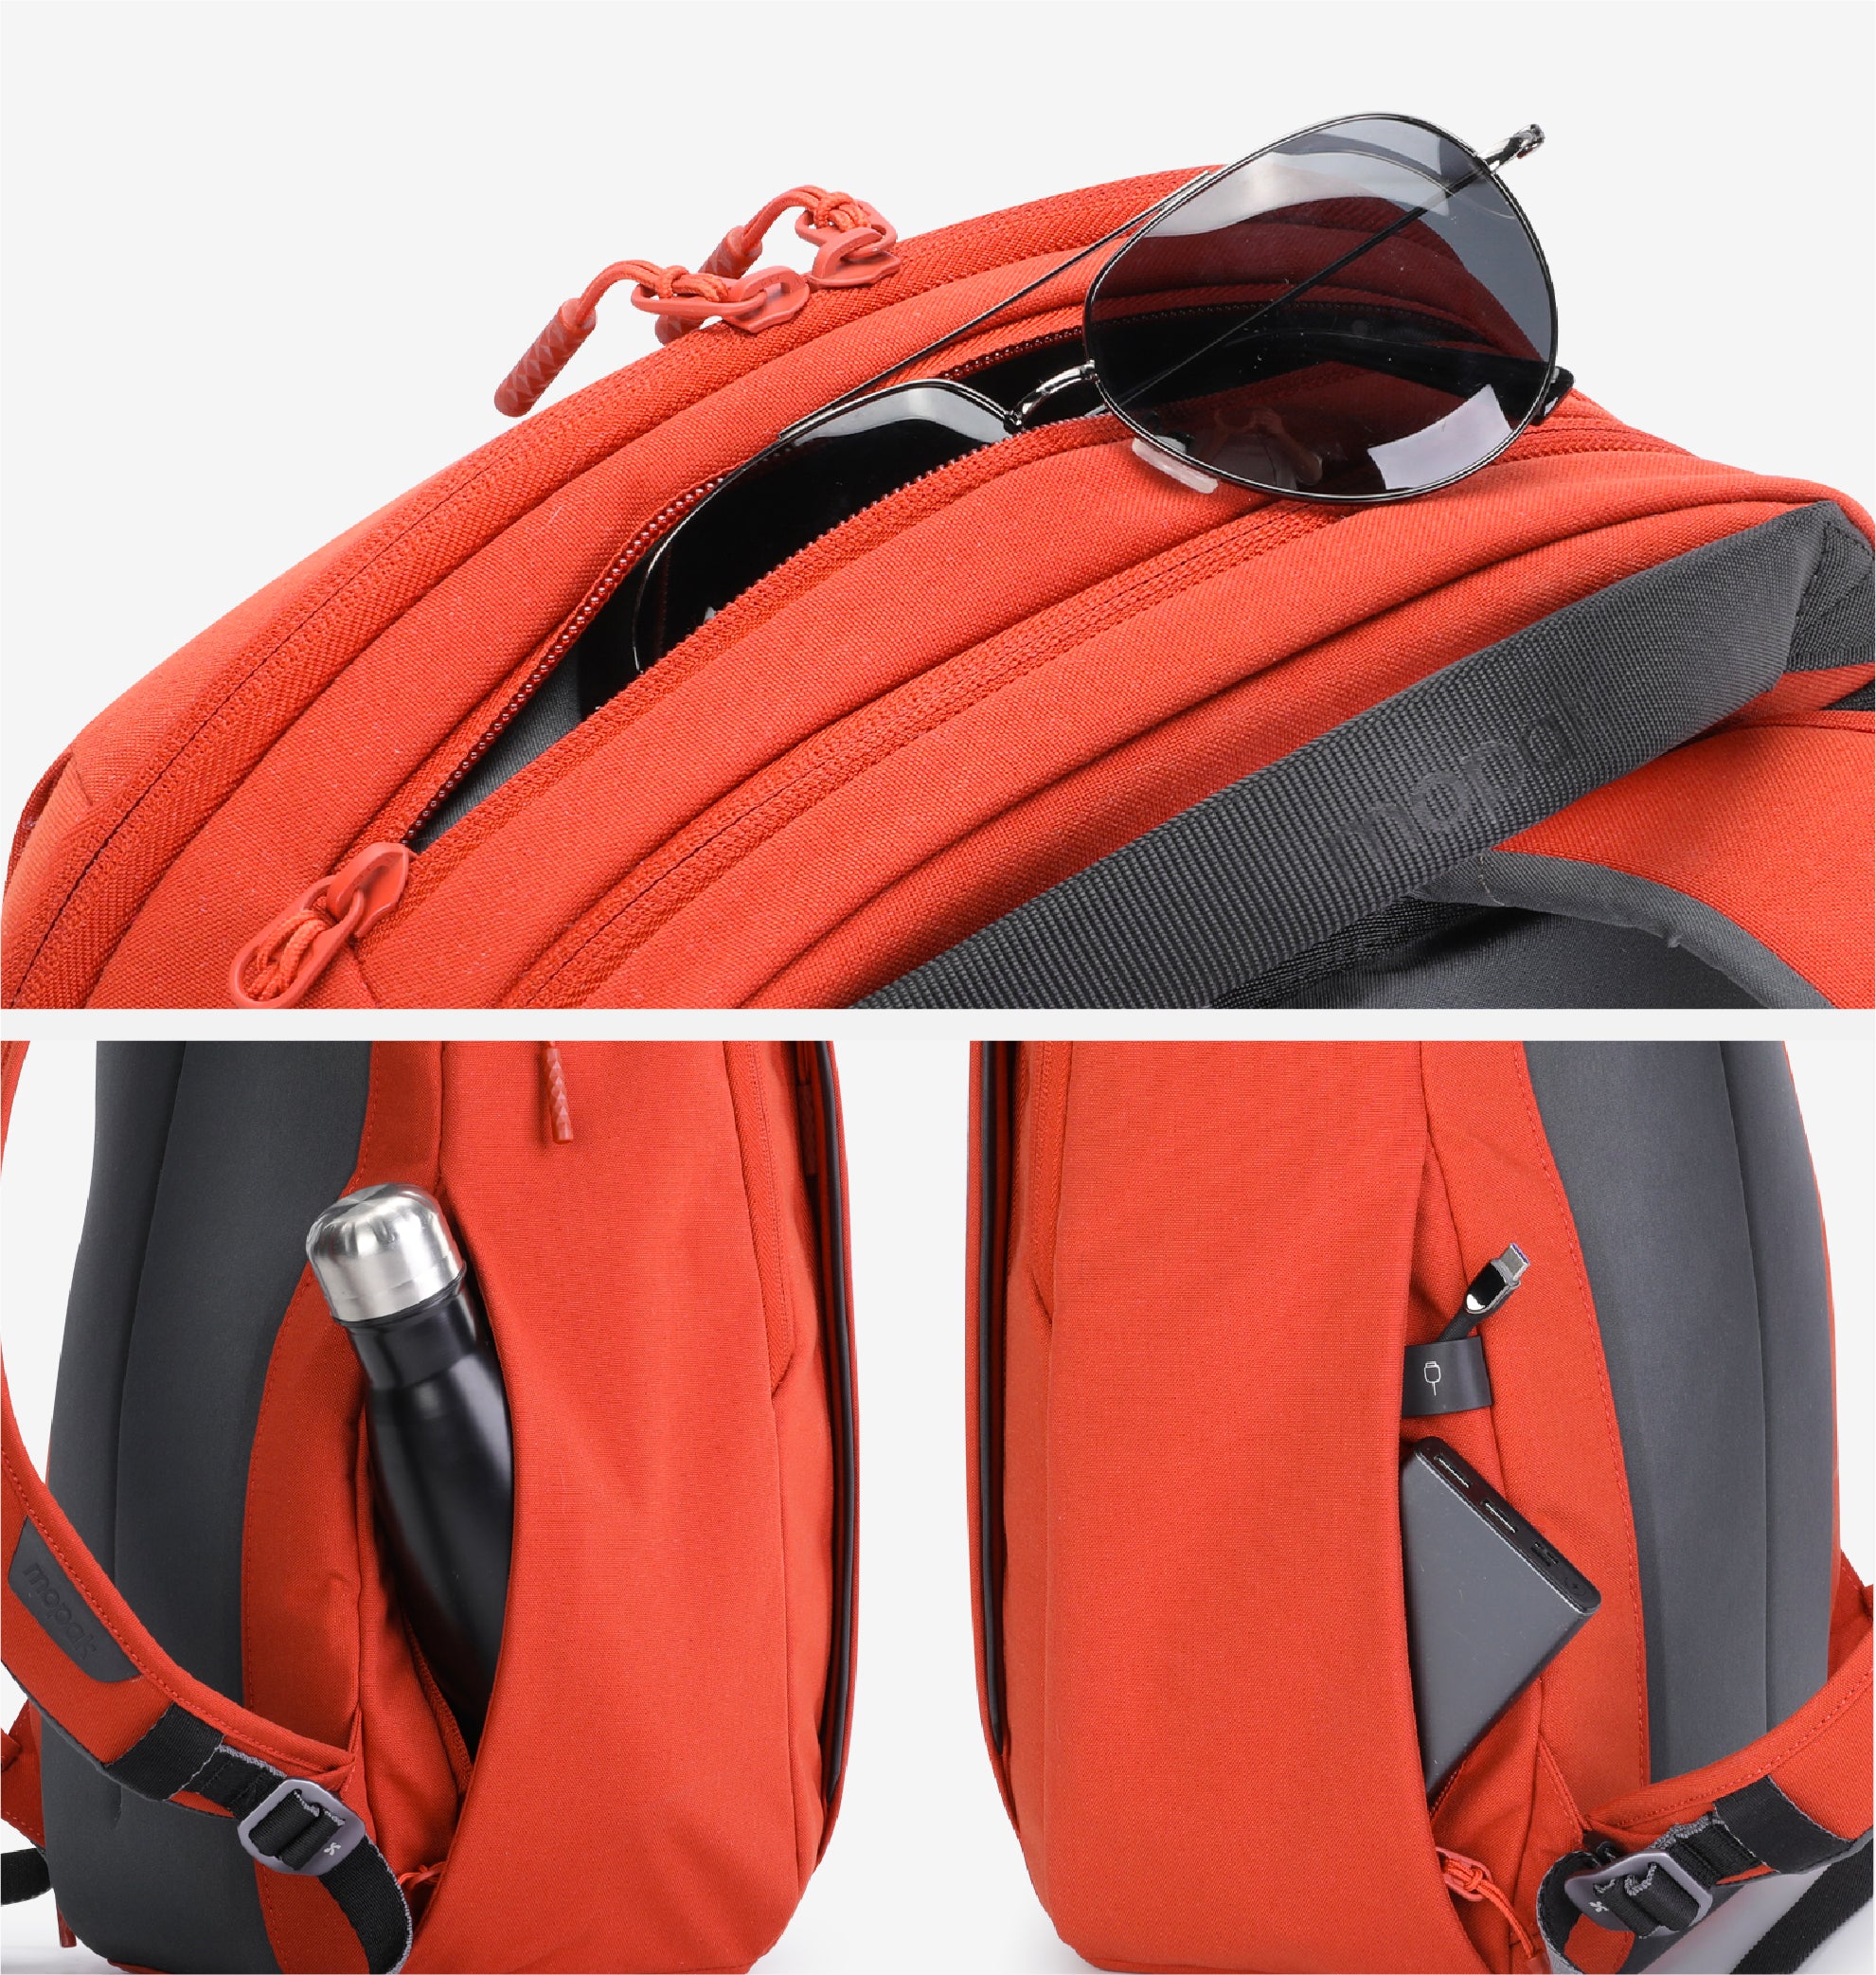 Top Pocket Quick Access for Sunglasses and side pockets for water bottles